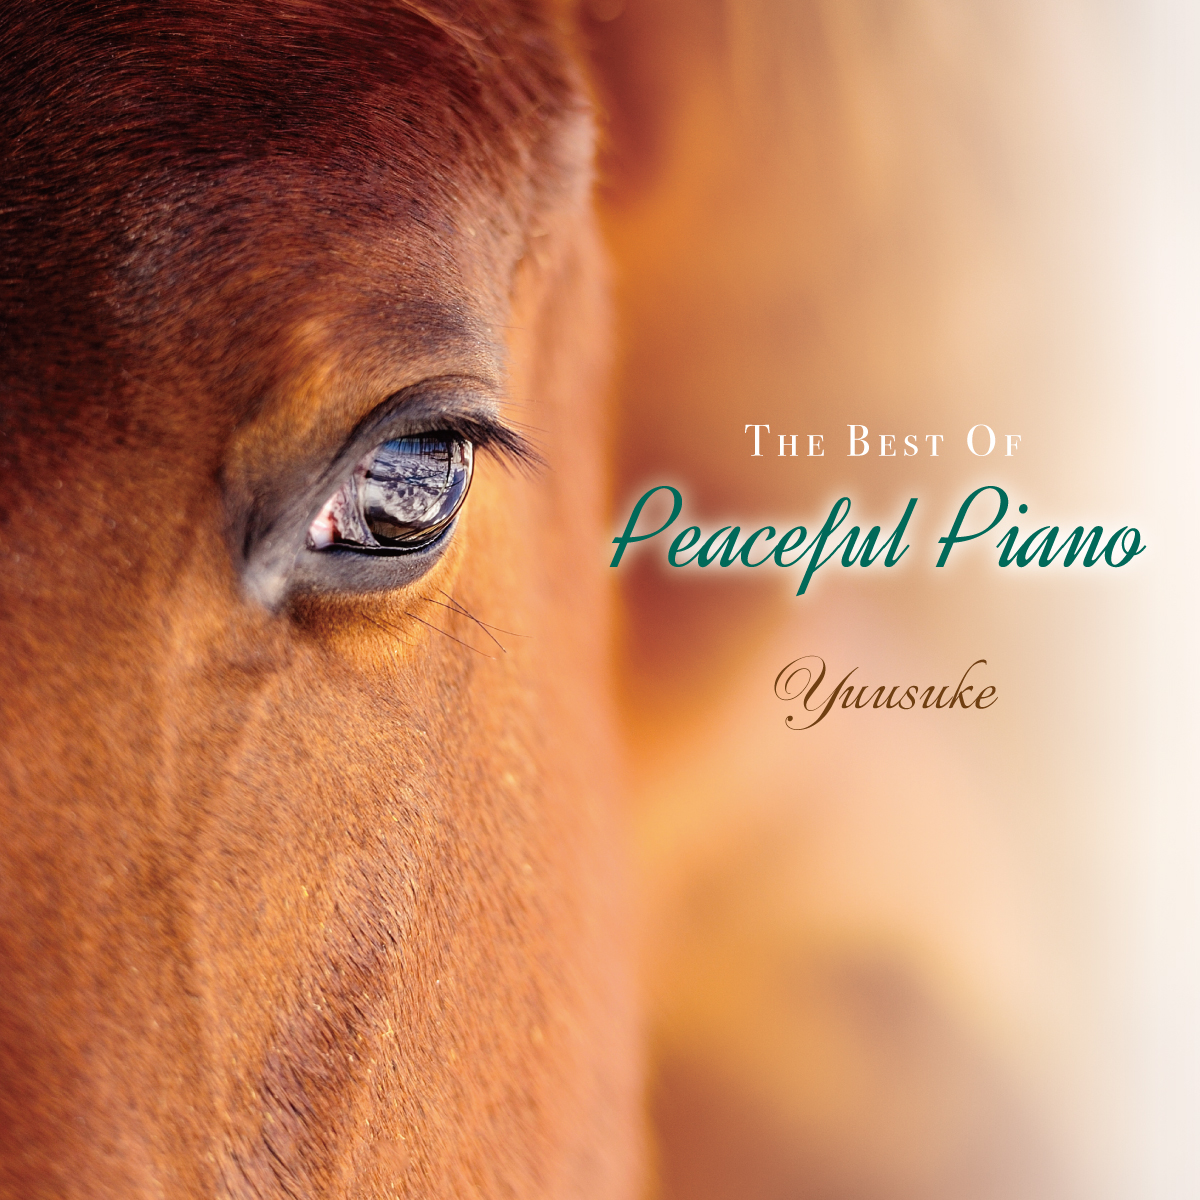 The Best of Peaceful Piano